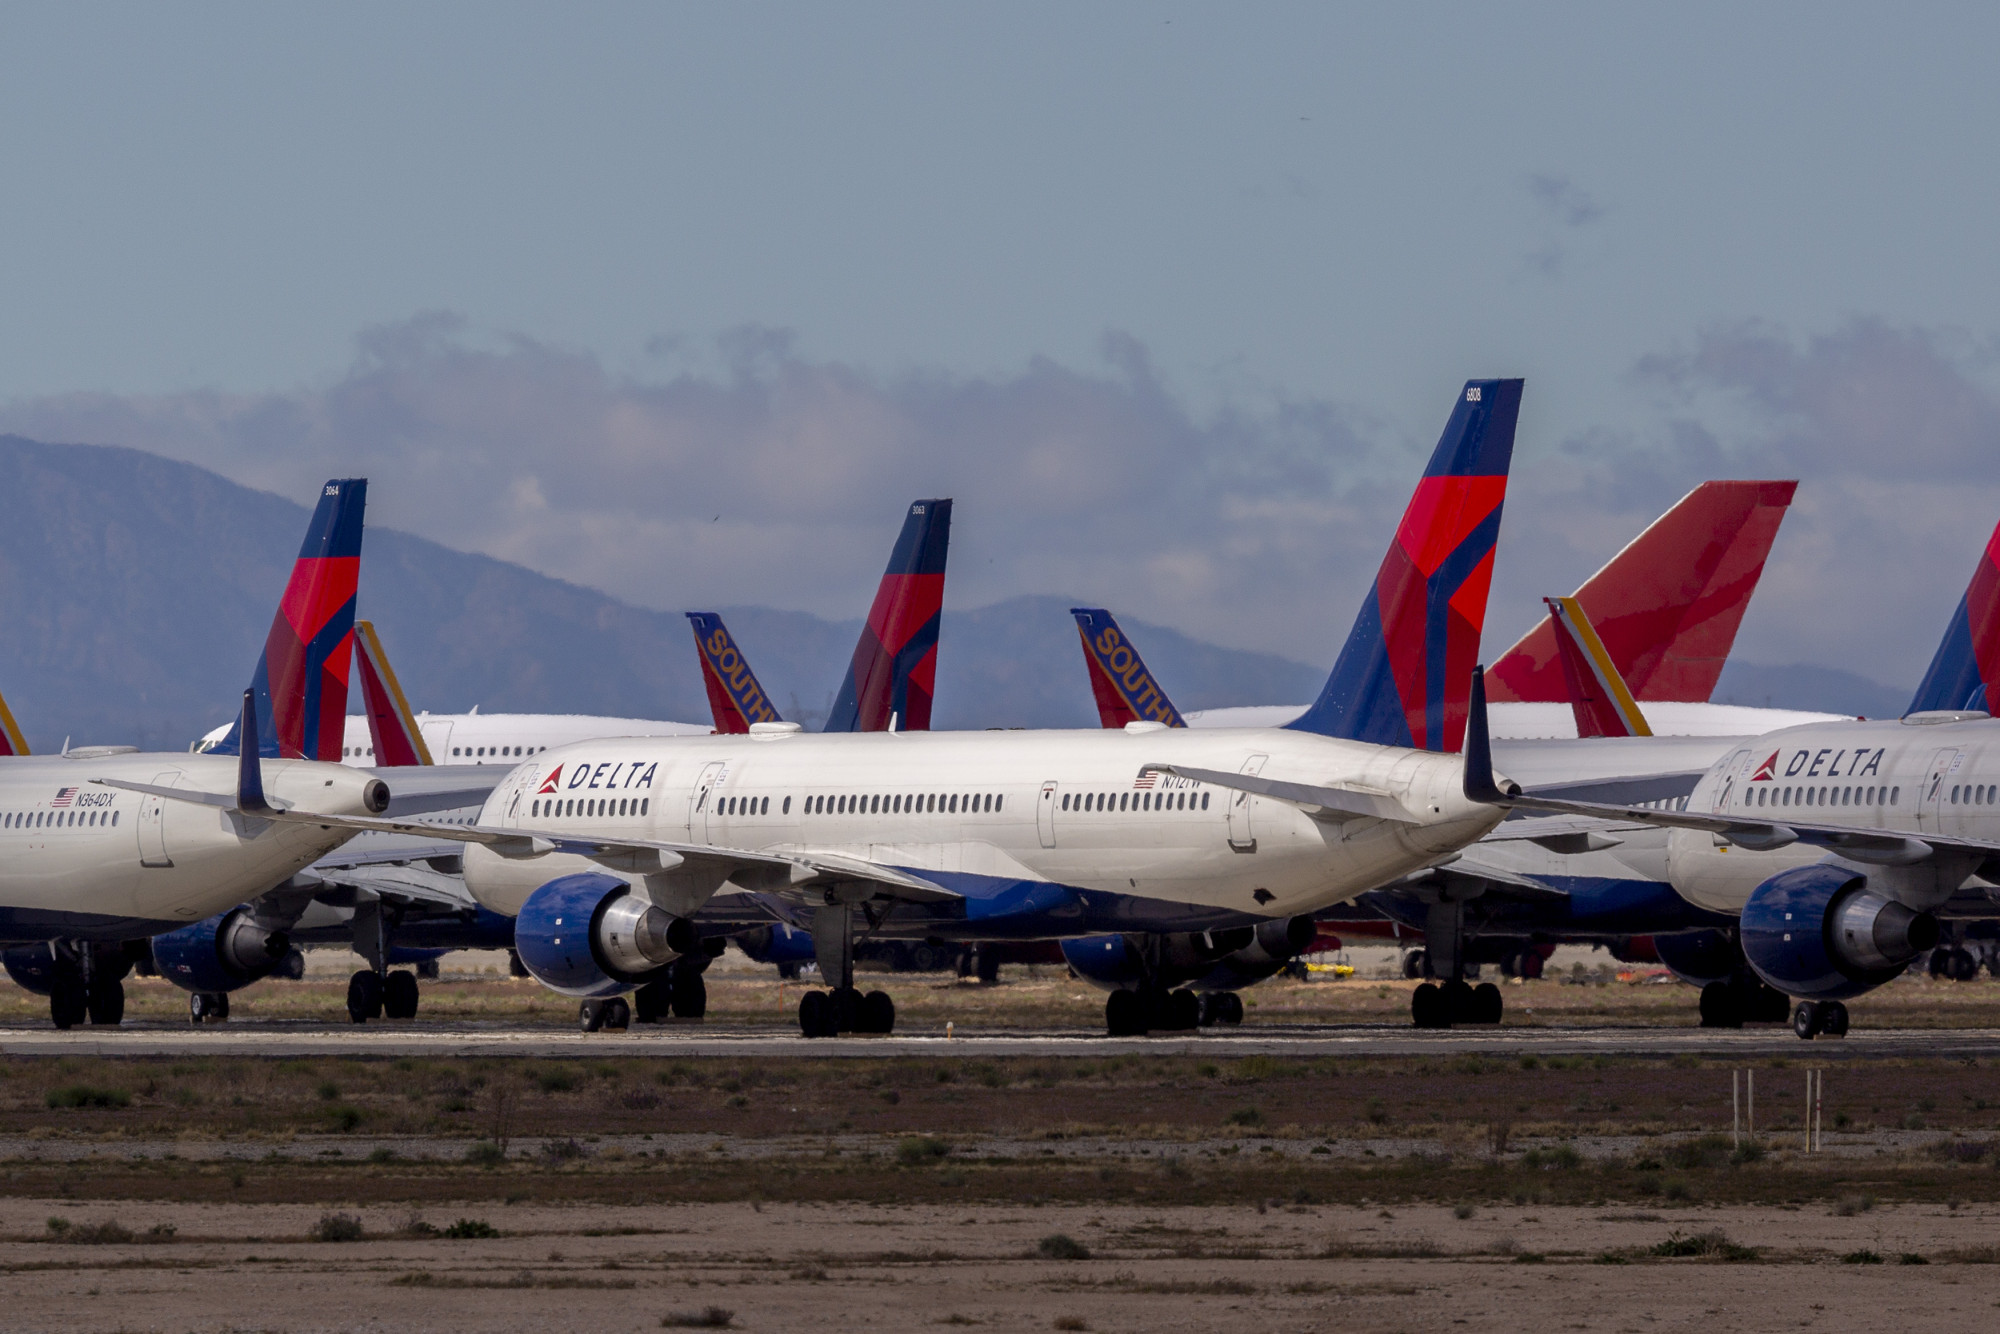 Passenger Arrested on Delta Flight After Cutting Himself and a Flight Attendant, Authorities Say